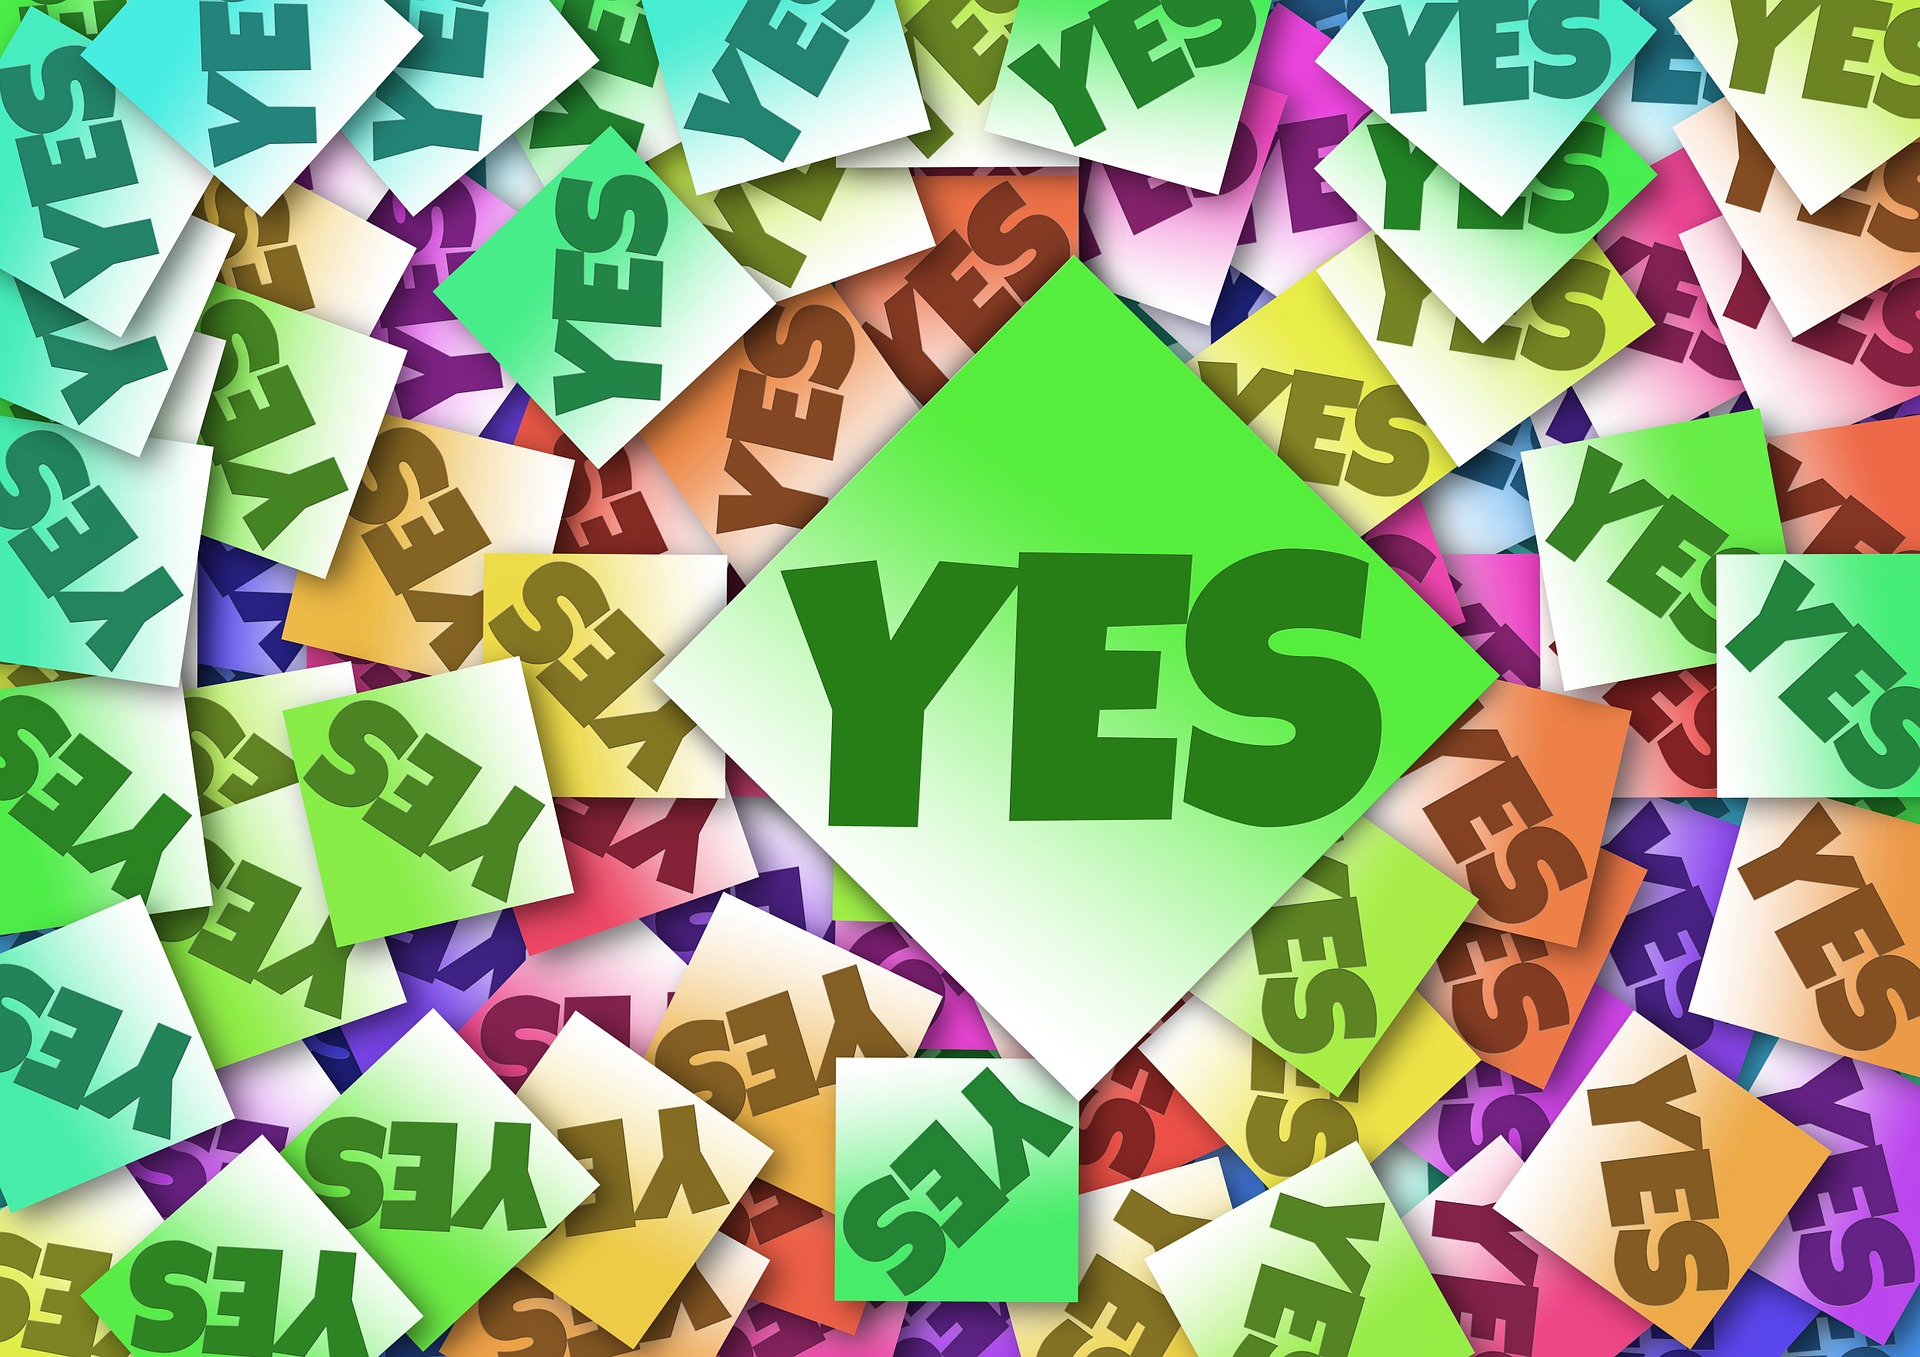 Make it super easy for your customers to say ‘Yes’